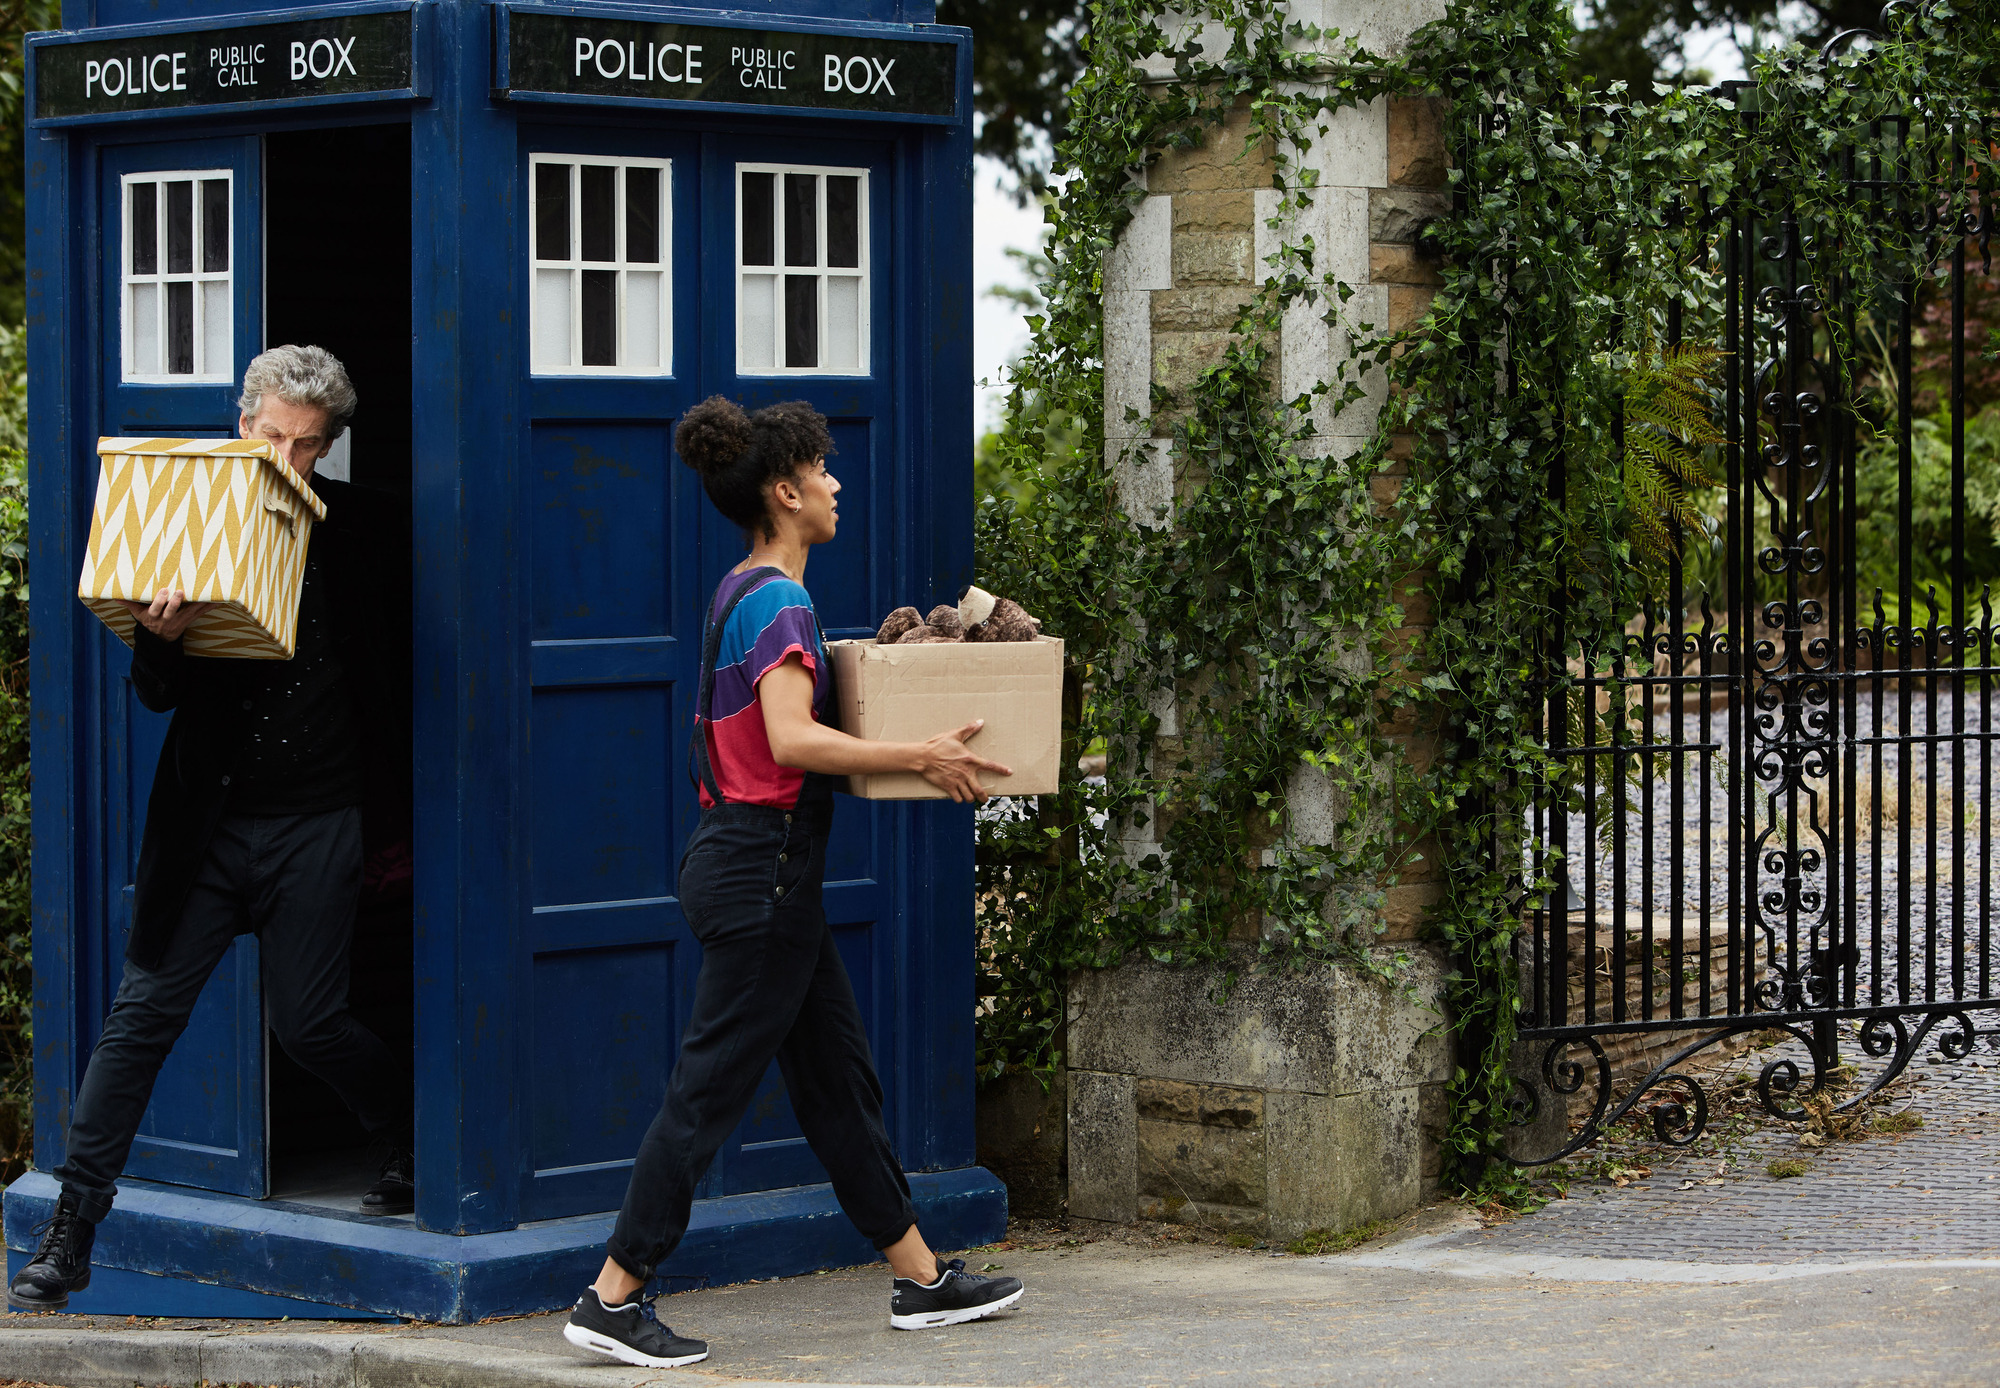 Doctor Who 10.4 – “Knock Knock”